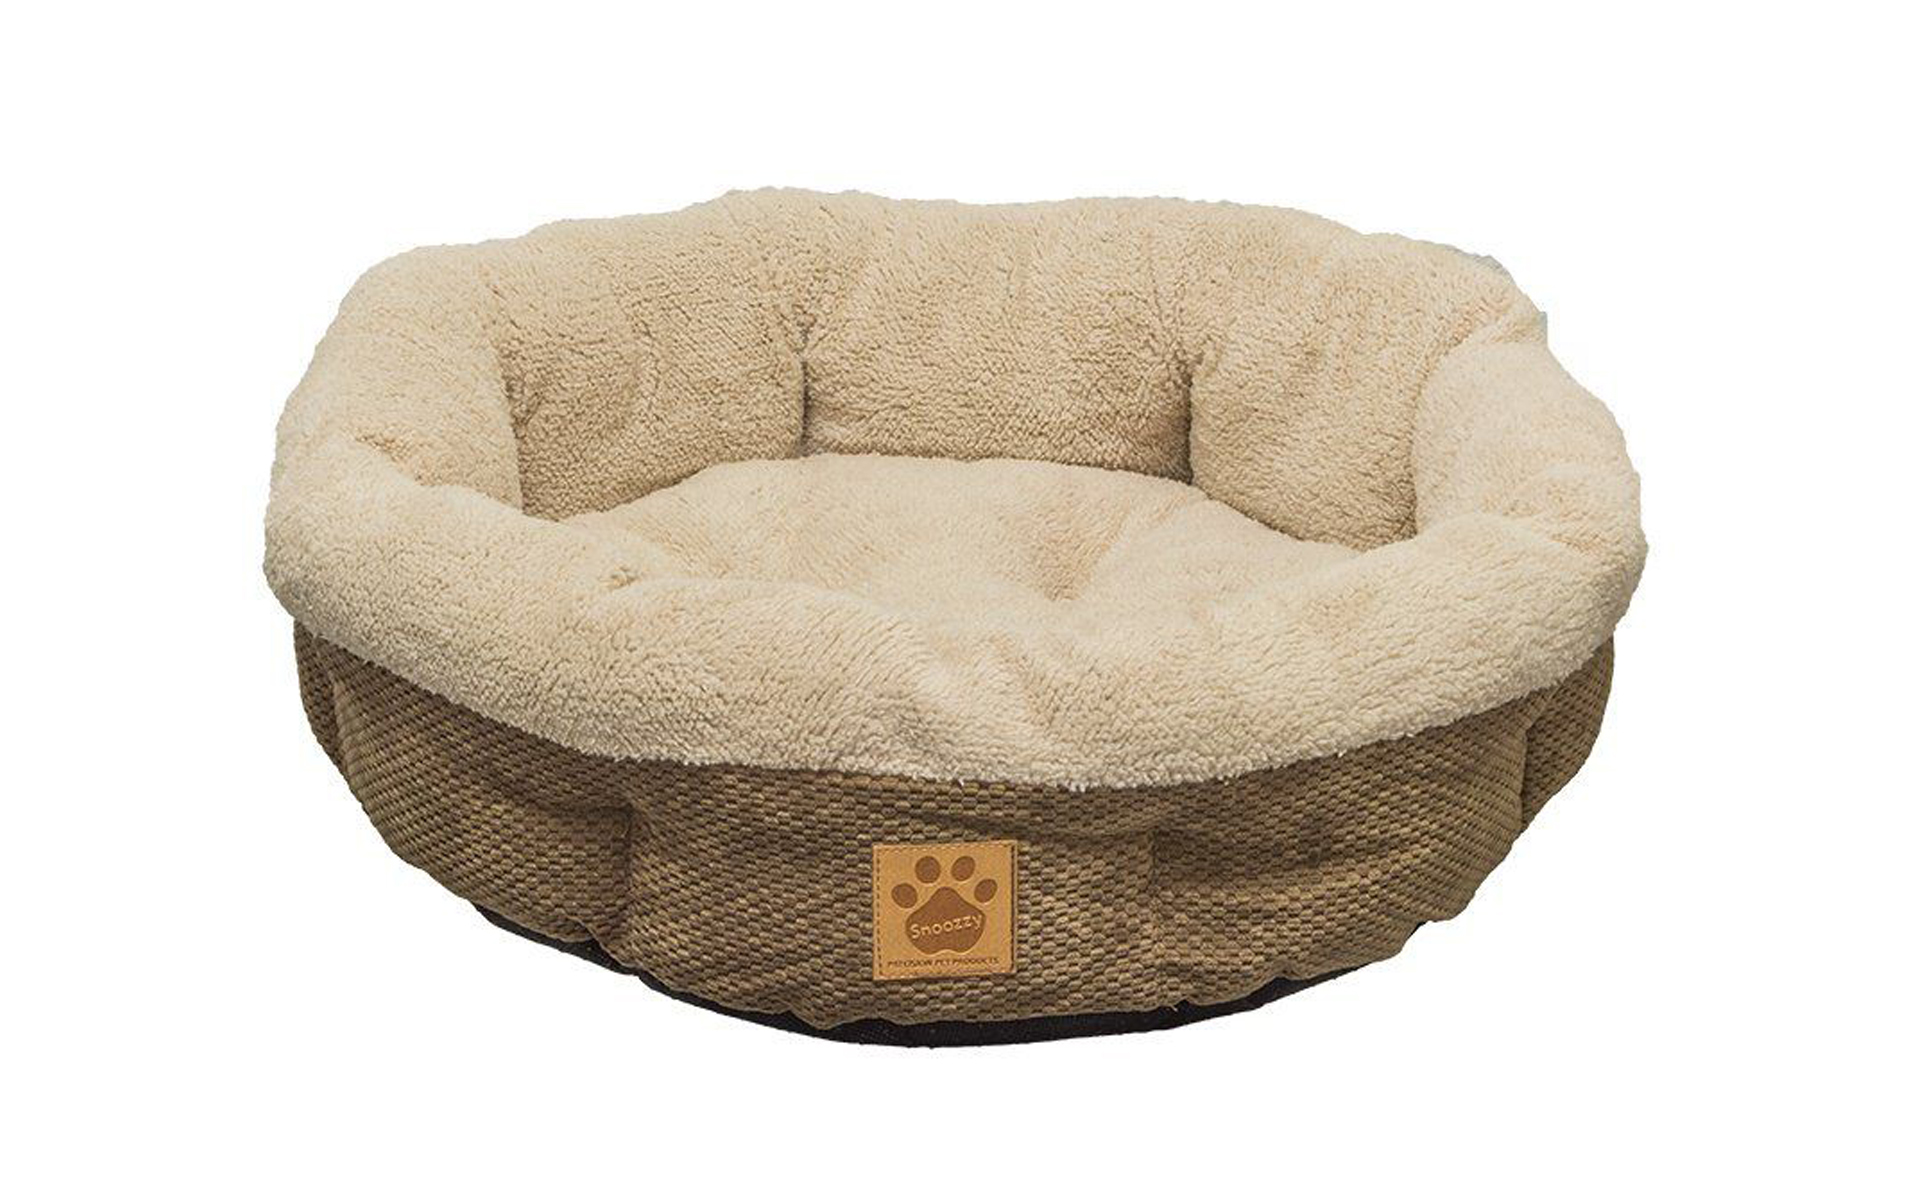 Natural Surroundings Shearling Dog Donut Bed - Coffee